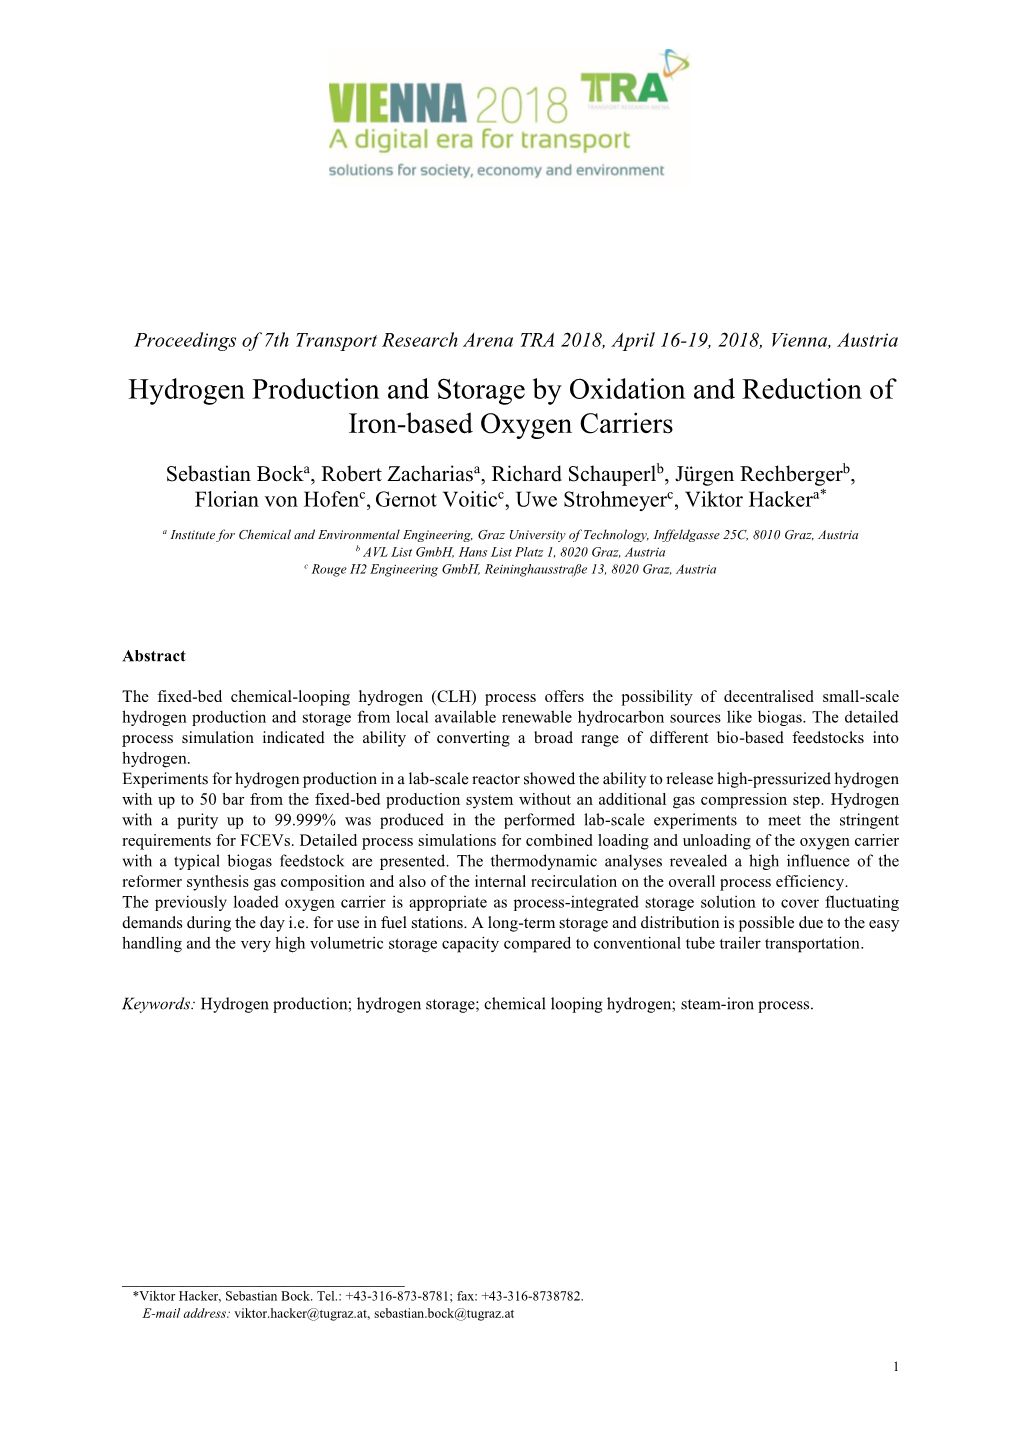 Hydrogen Production and Storage by Oxidation and Reduction of Iron-Based Oxygen Carriers